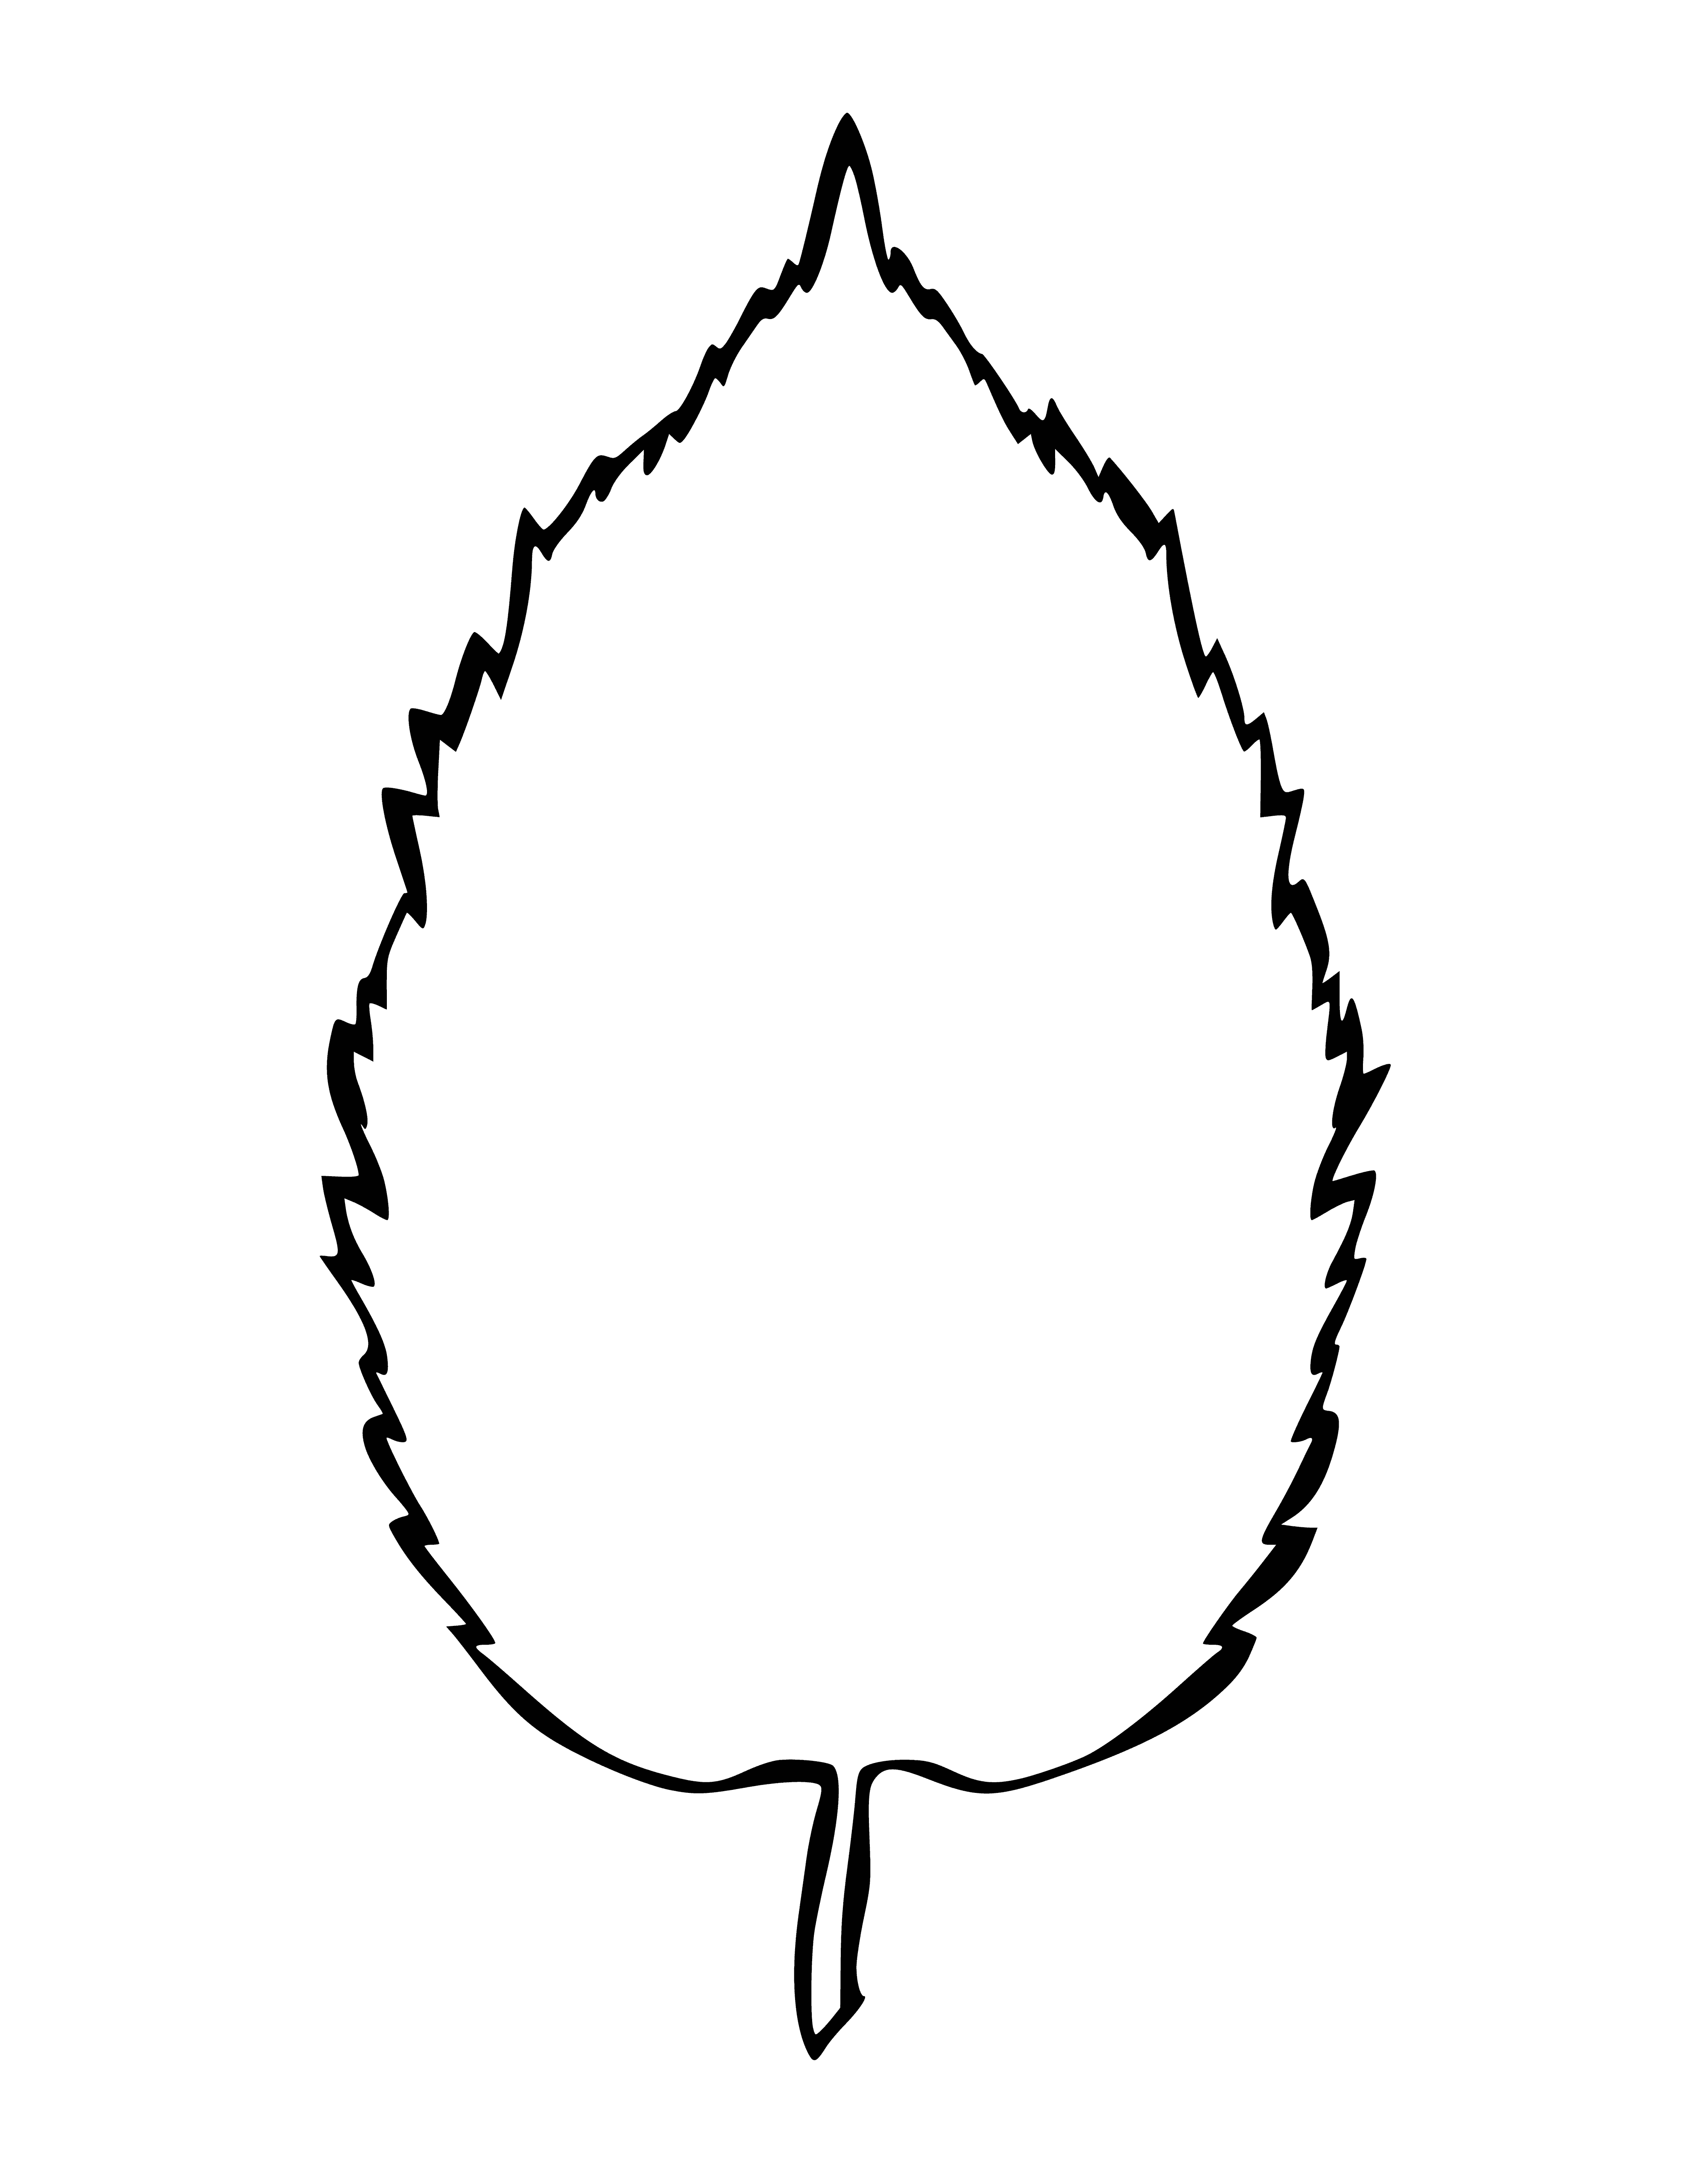 coloring page: Alder leaf has pointy tip & serrated edges; Green with stem, no fruits/flowers.